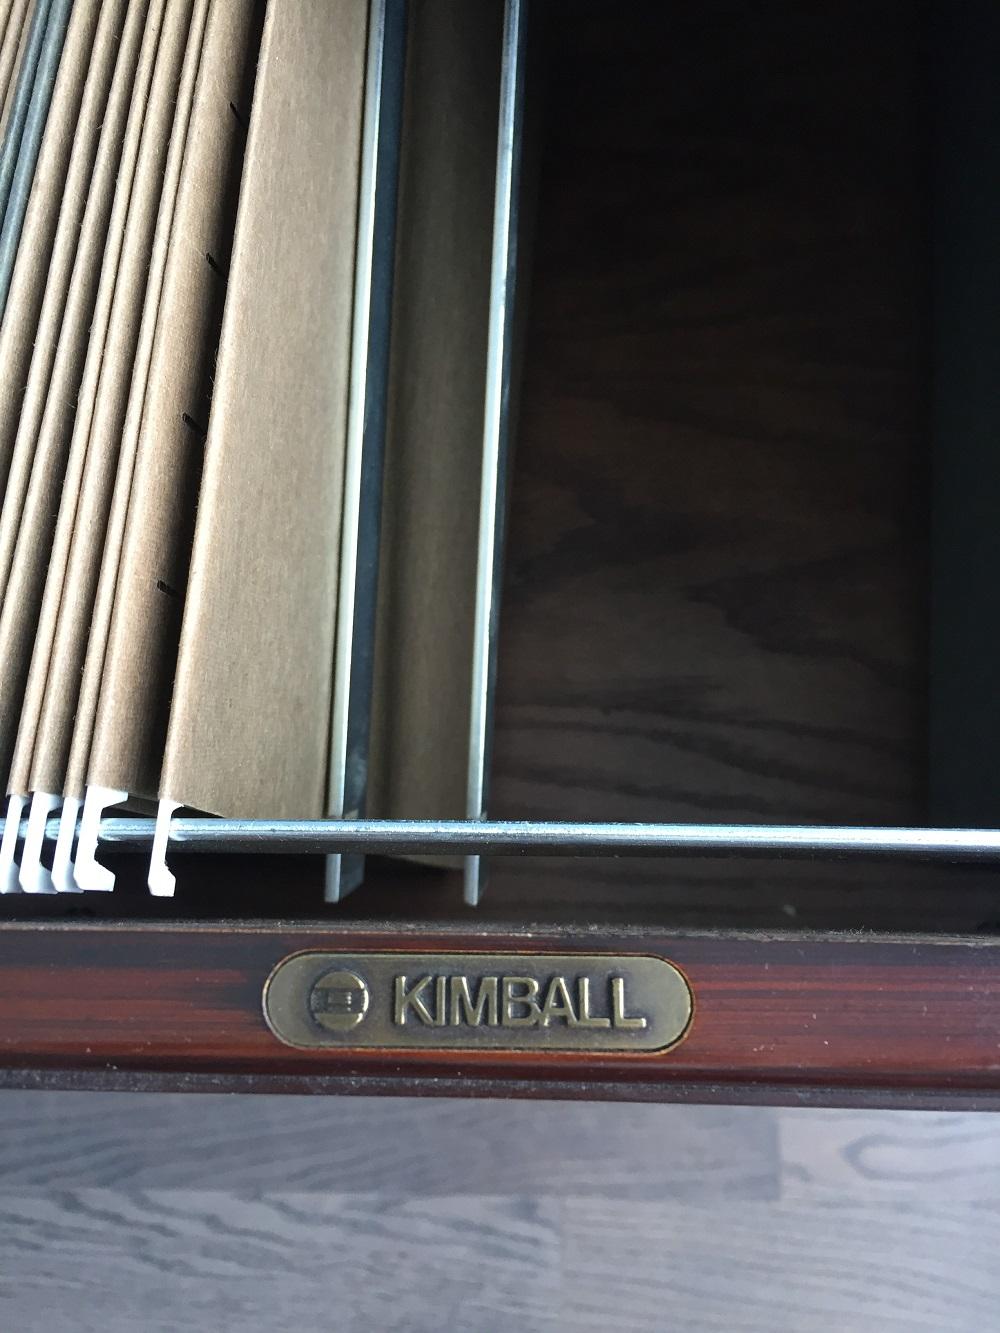 Kimball Chippendale wood and brass credenza
This fantastic Kimball Credenza has 